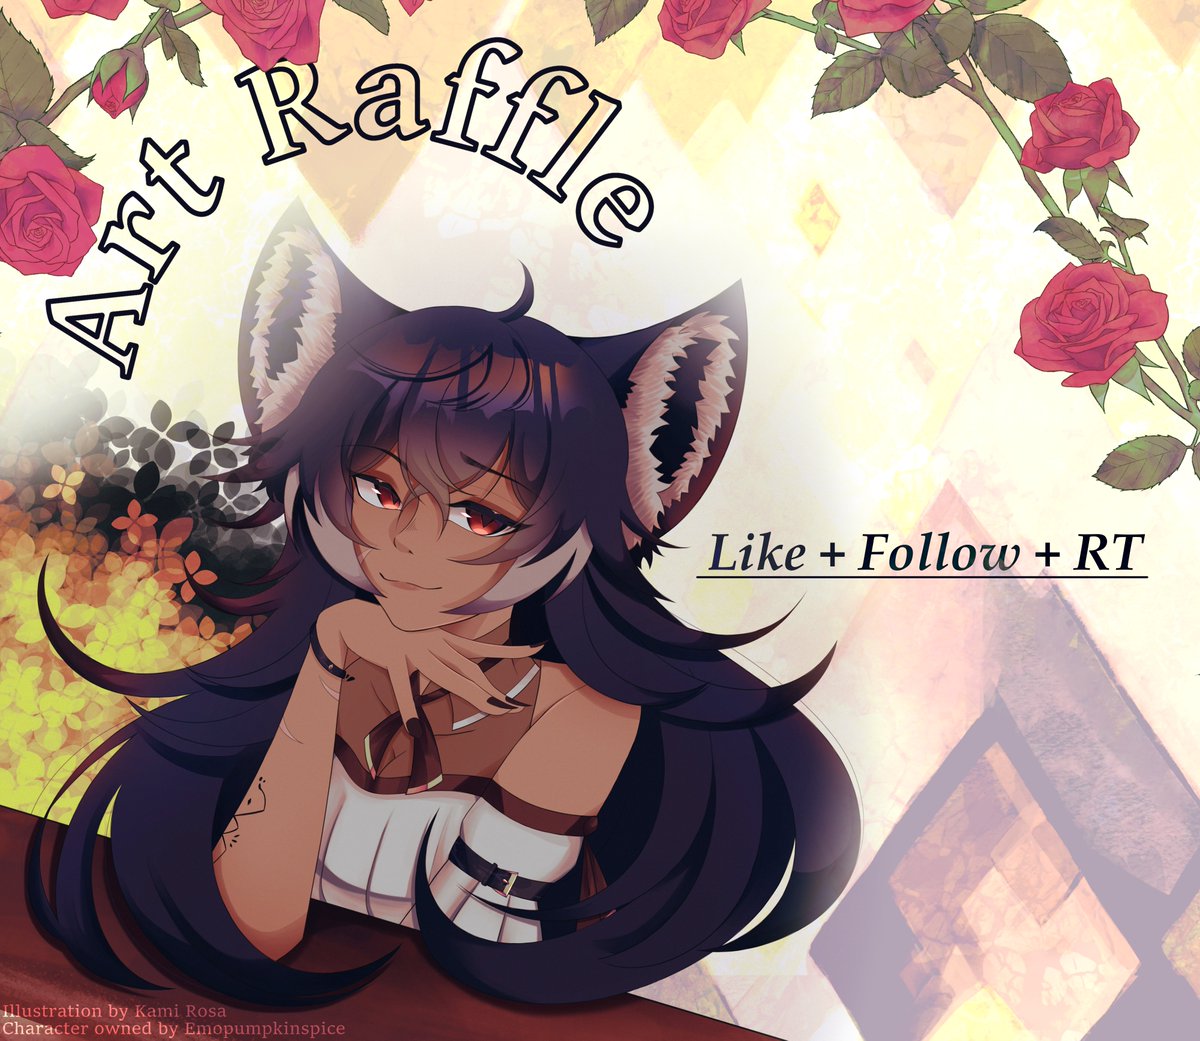 It's time for a little art raffle ! 🦊🧡 RULES : ✨Follow me + RT + Like to join ✨Leave your png in comments (optional) ✨Ends April 21st Winner will get an headshot illustration! 🧡